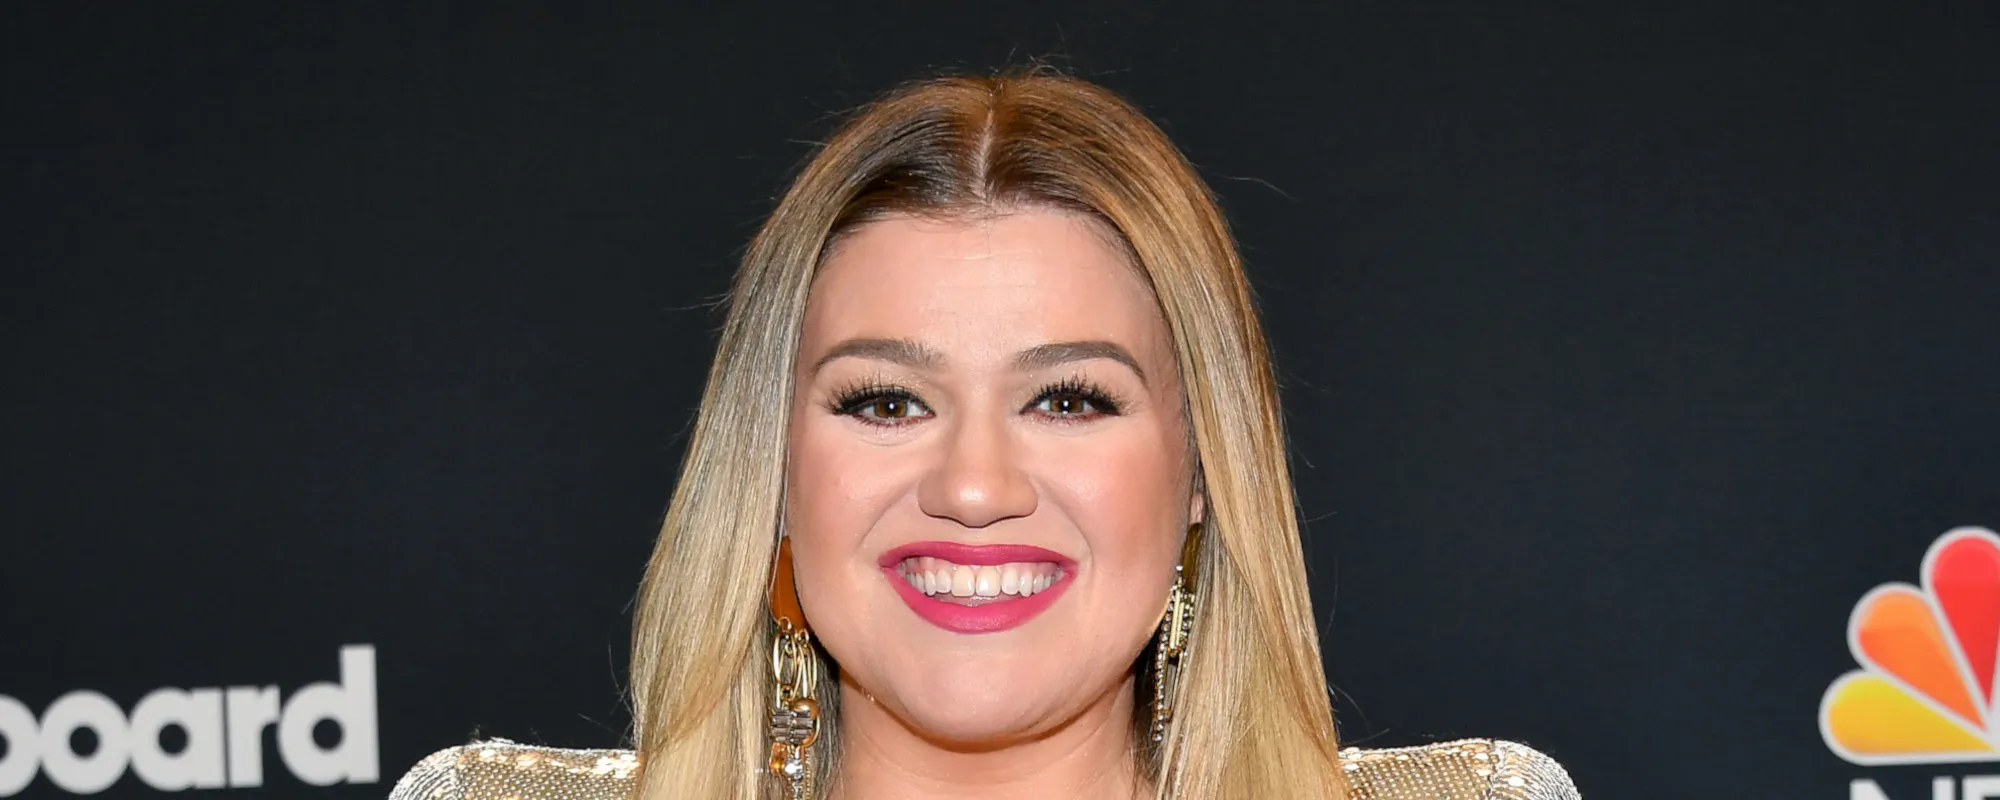 Kelly Clarkson Covers Celine Dion for Latest ‘Kellyoke’